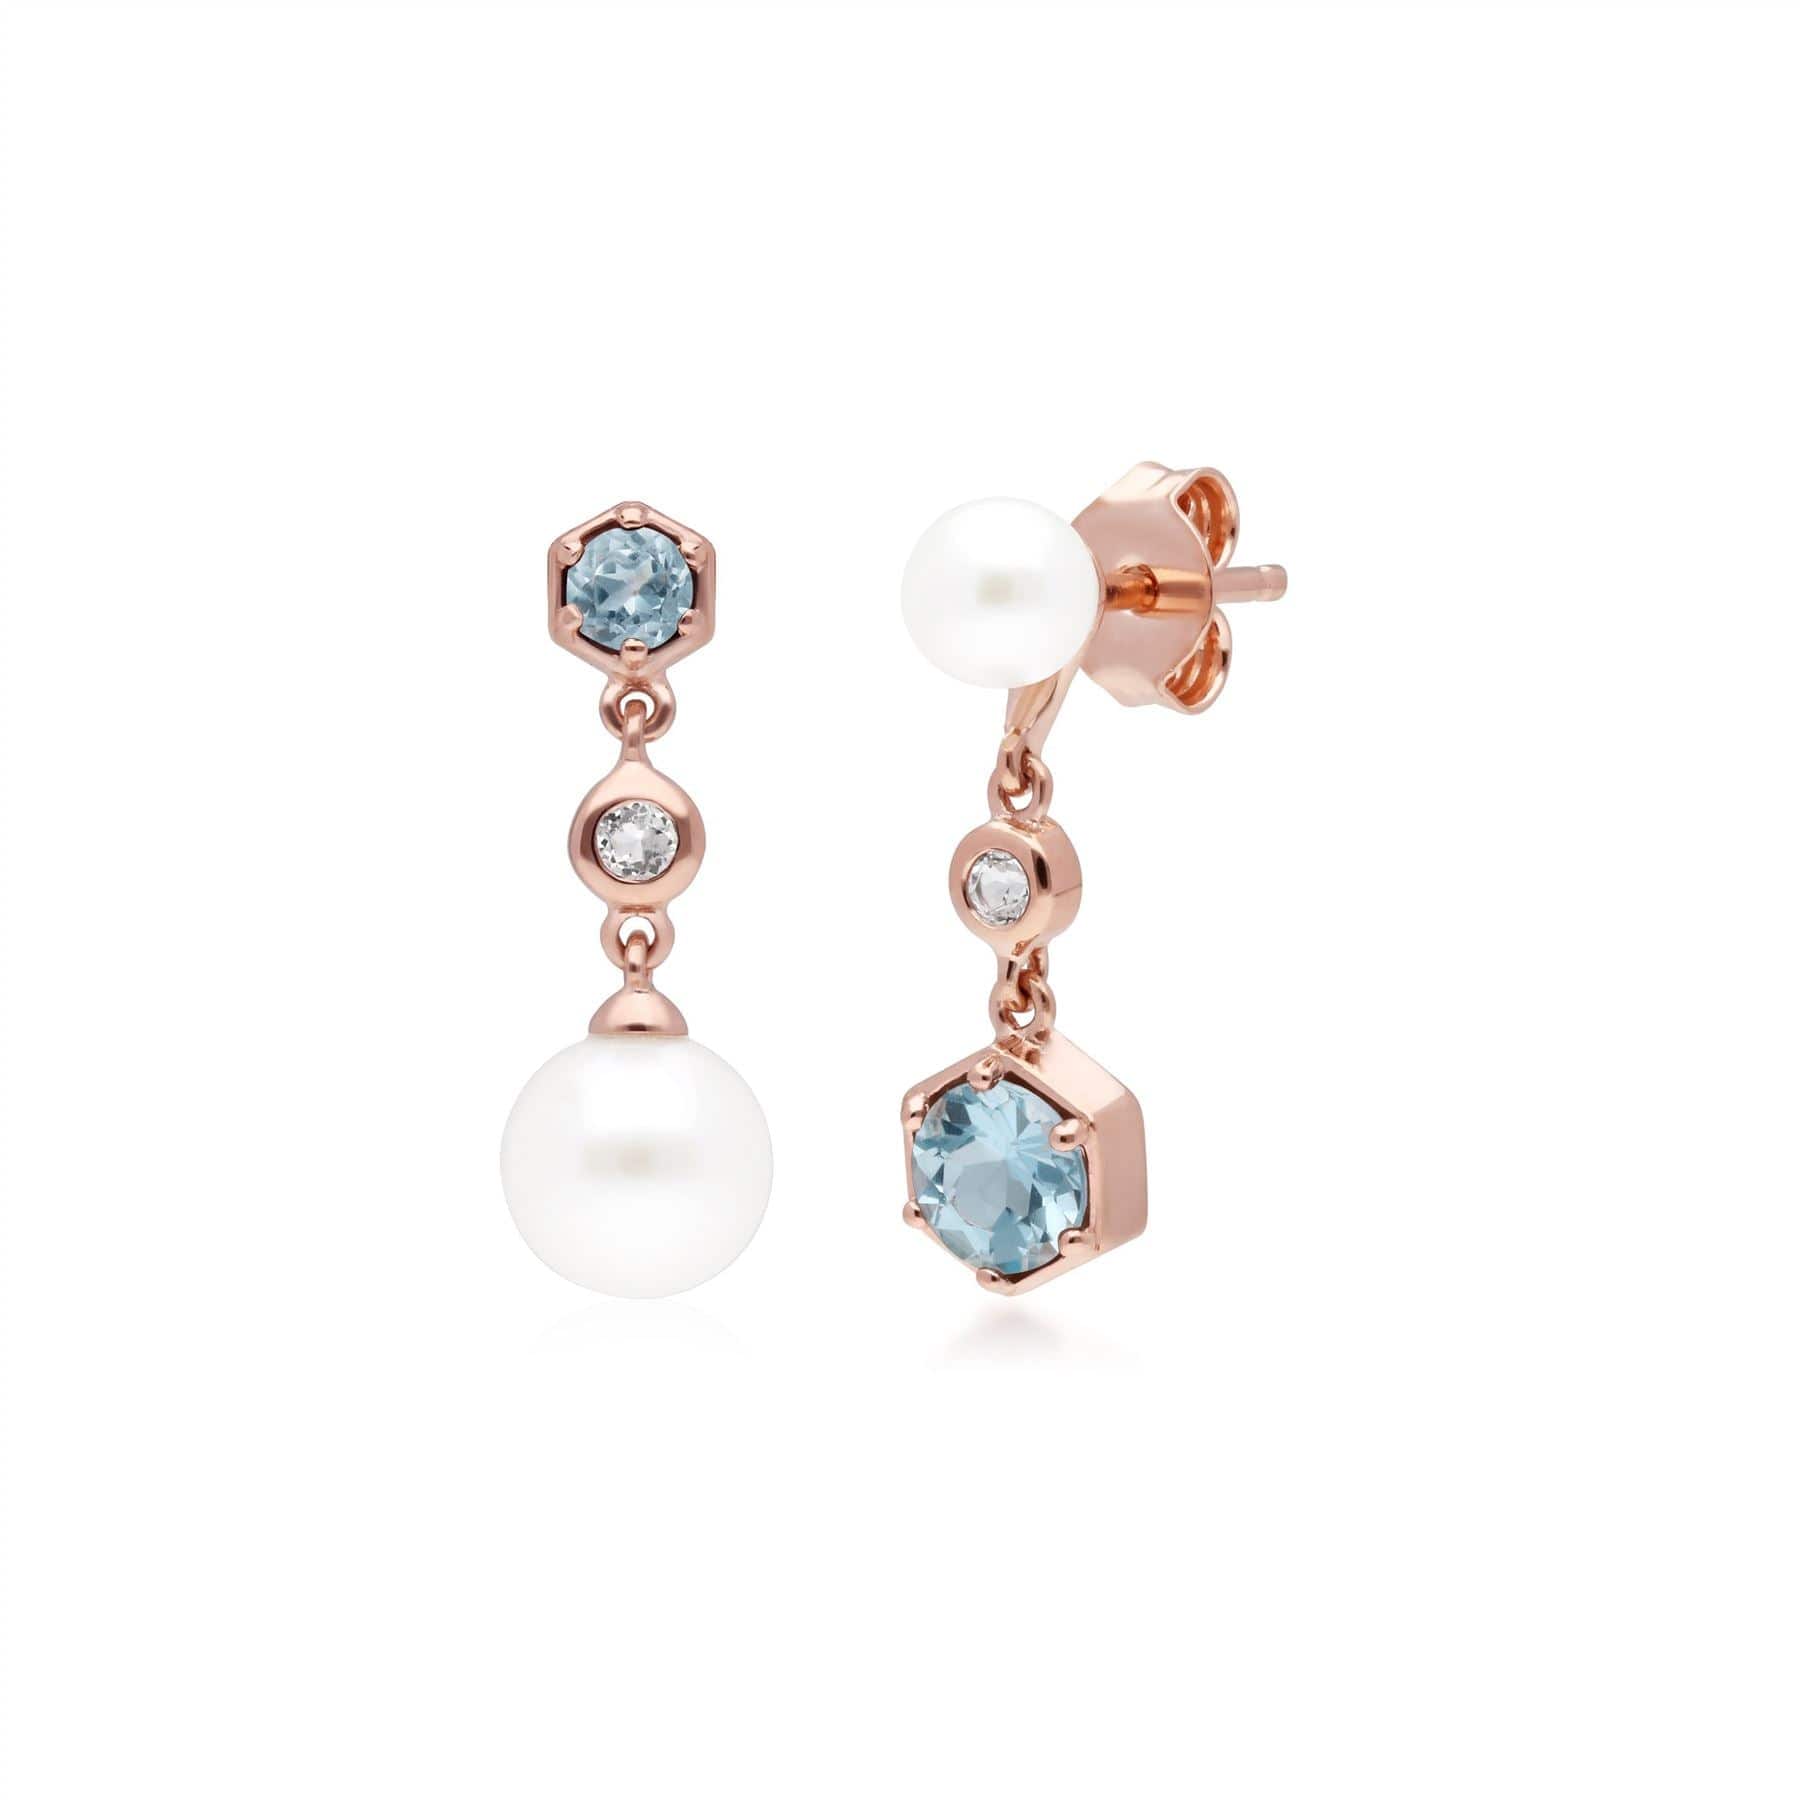 Photos - Earrings Modern Pearl, White & Blue Topaz Mismatched Drop  in Rose Gold Pla